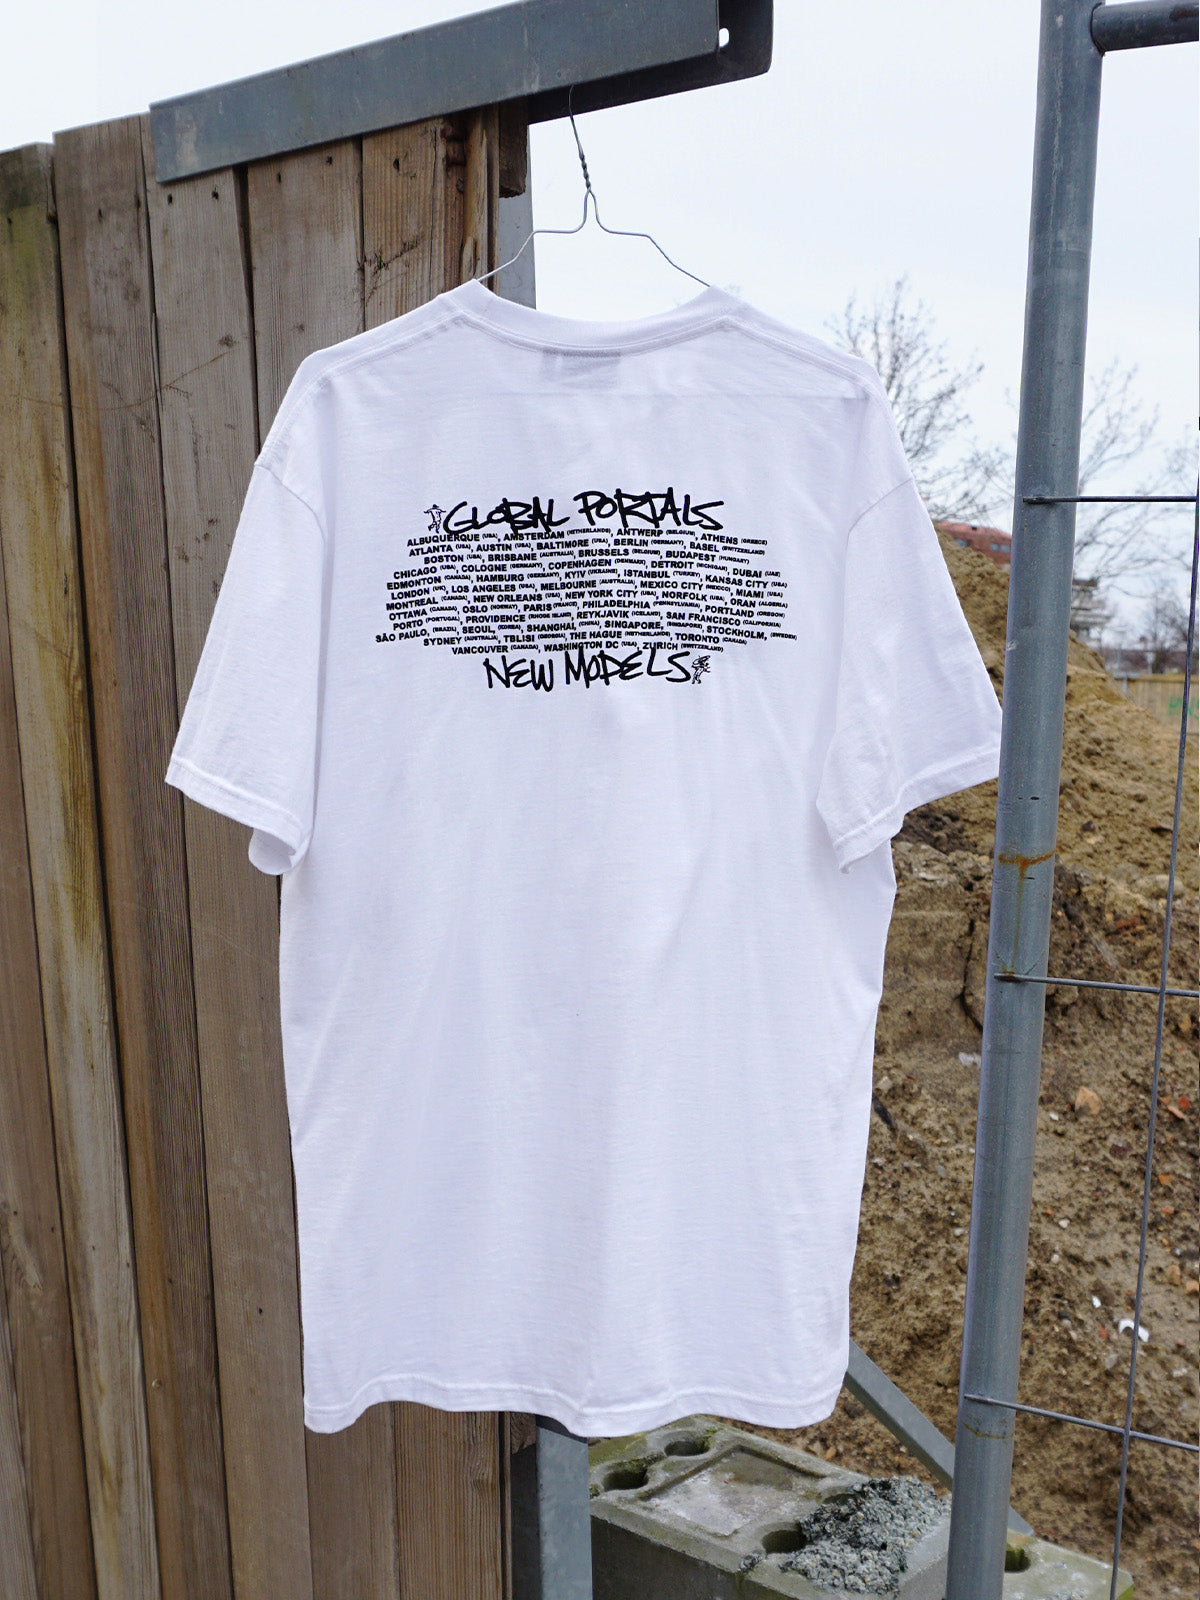 Back view: List of New Models' "Global Portals" screenprinted in black on back of 100% cotton white short-sleeve T.